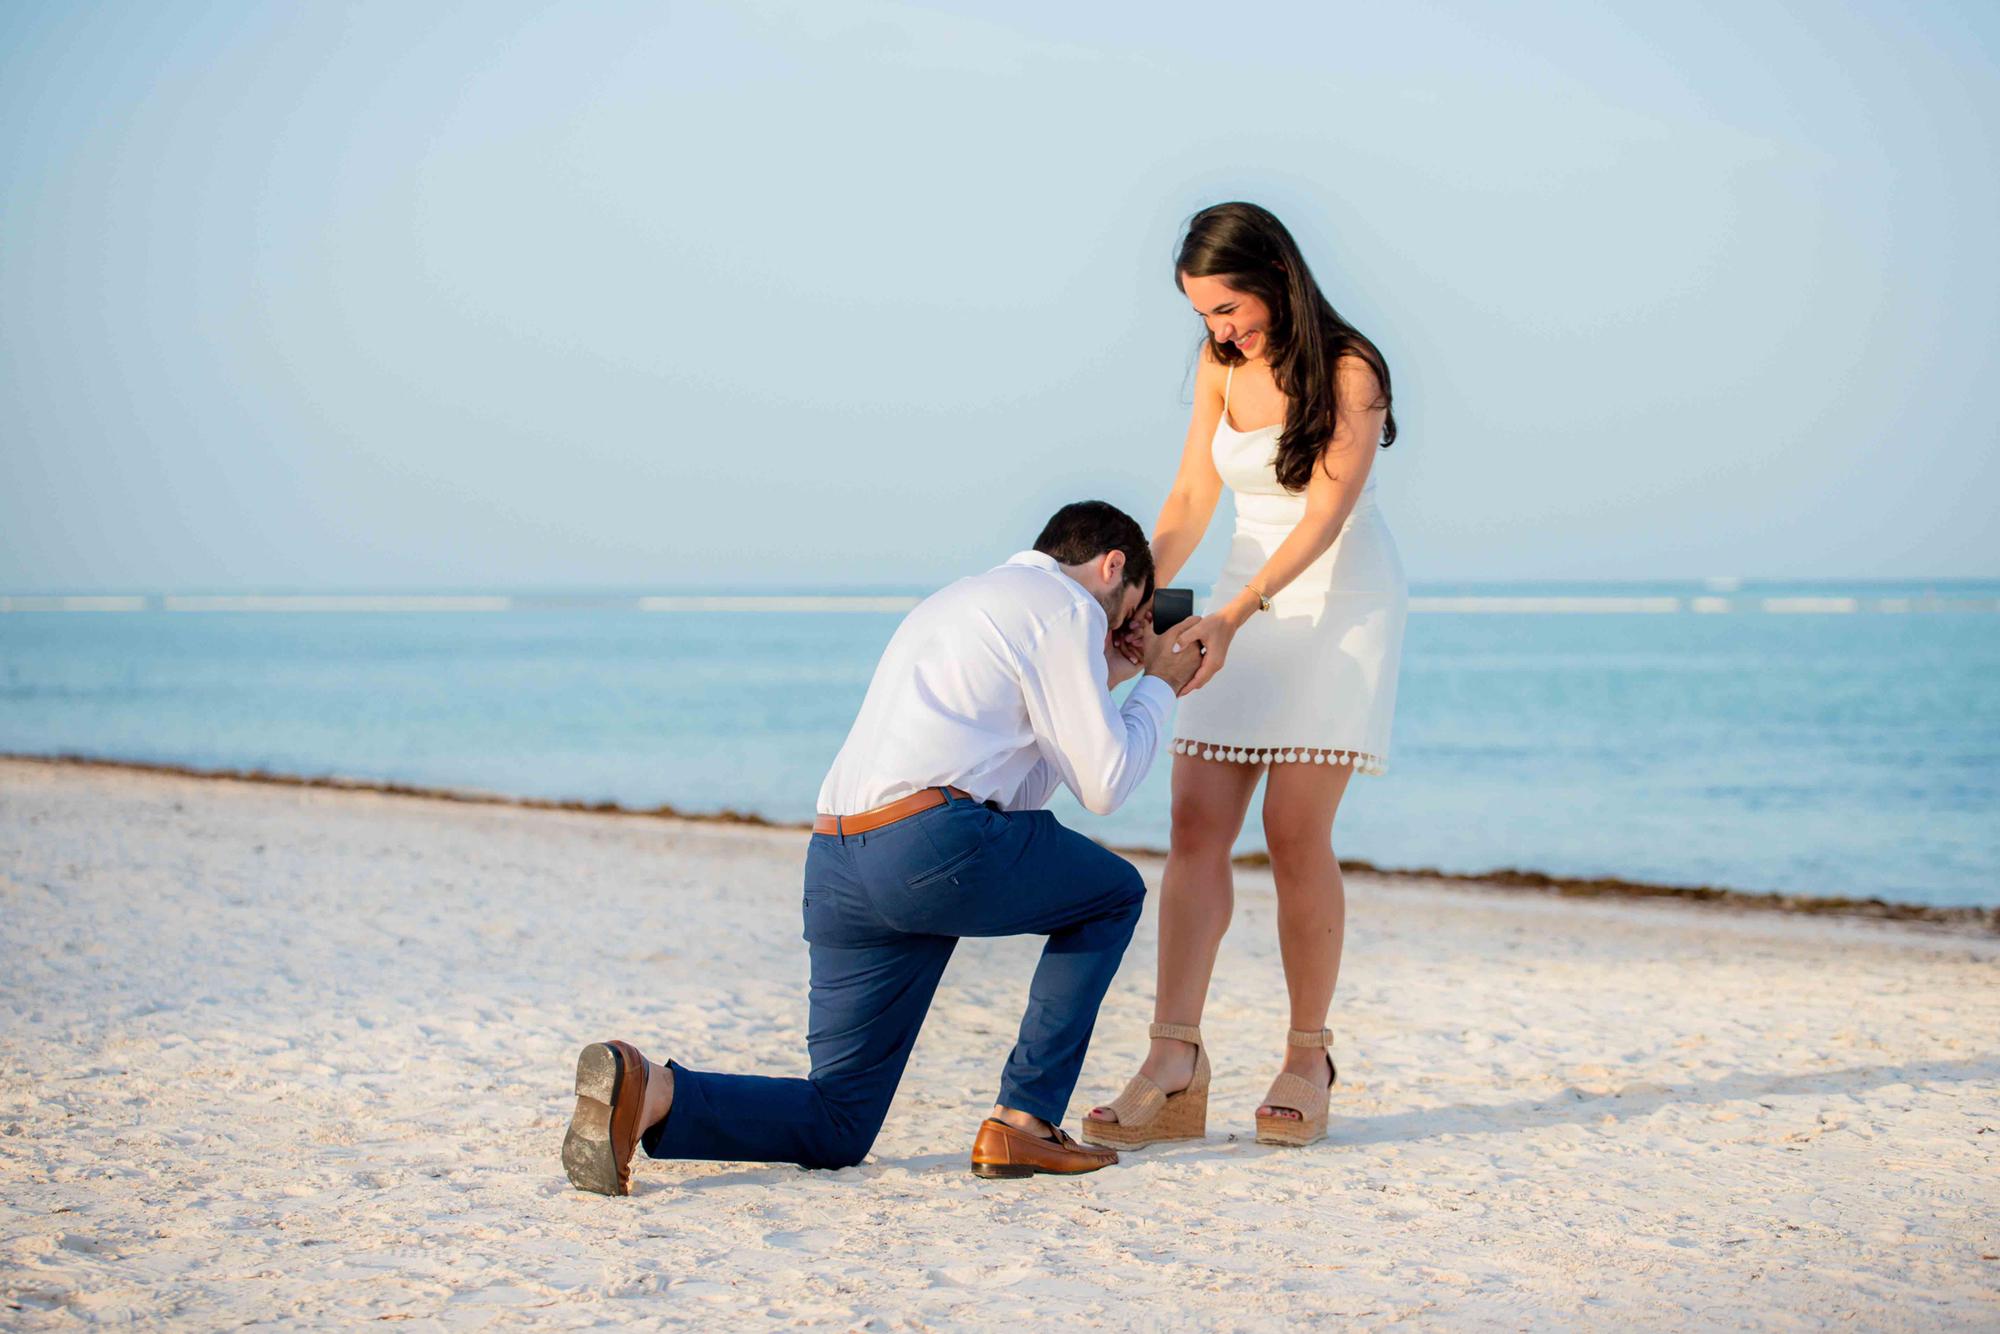 The Proposal! - Punta Cana, DR
05.17.21